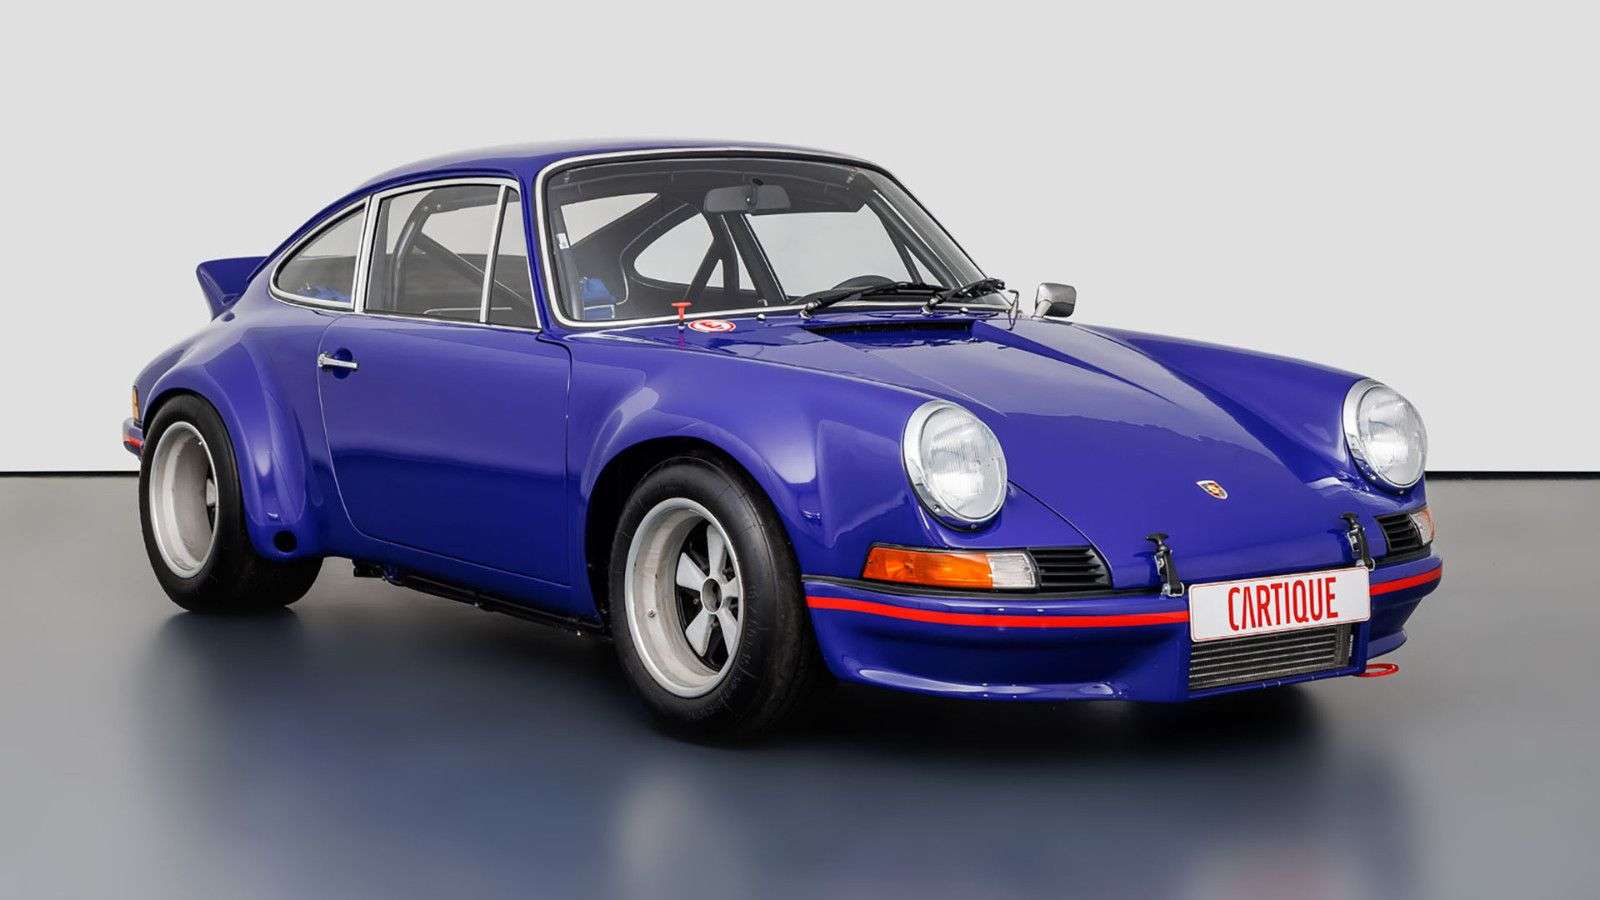 Porsche 911 Coupe in Blue used in Pleidelsheim for € 1,799,000.-